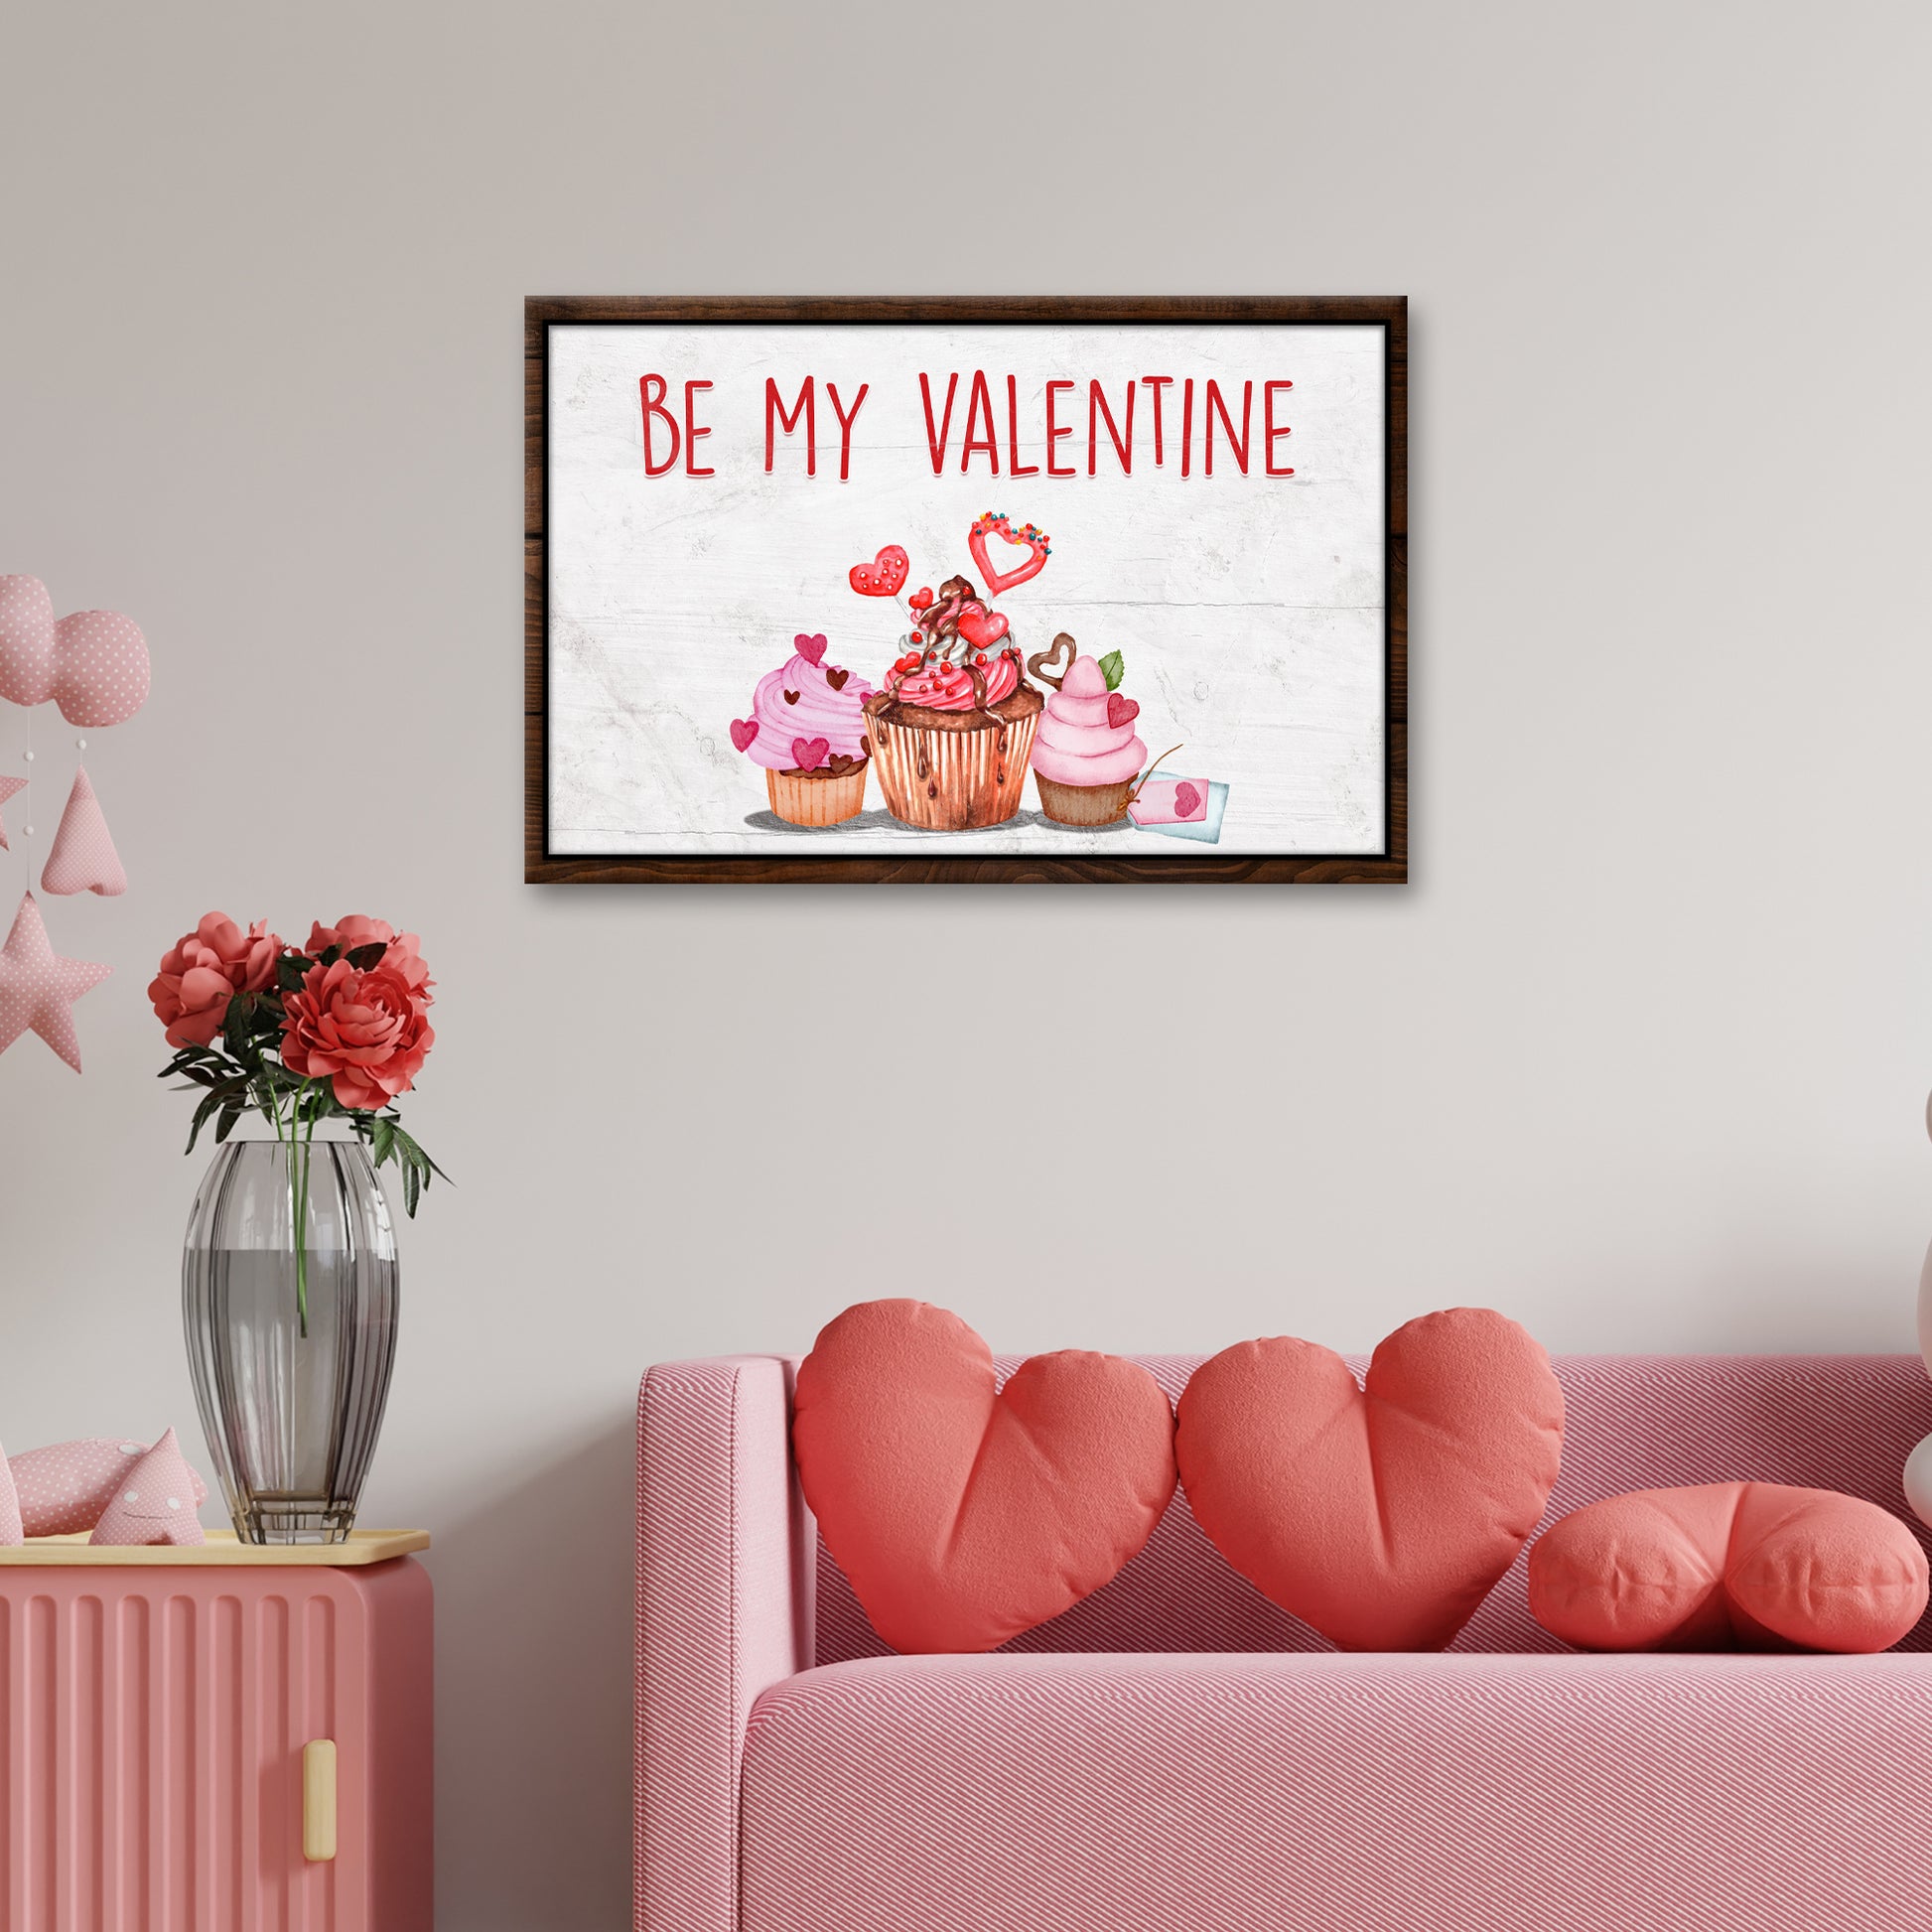 Be My Valentine Cupcake Sign - Image by Tailored Canvases